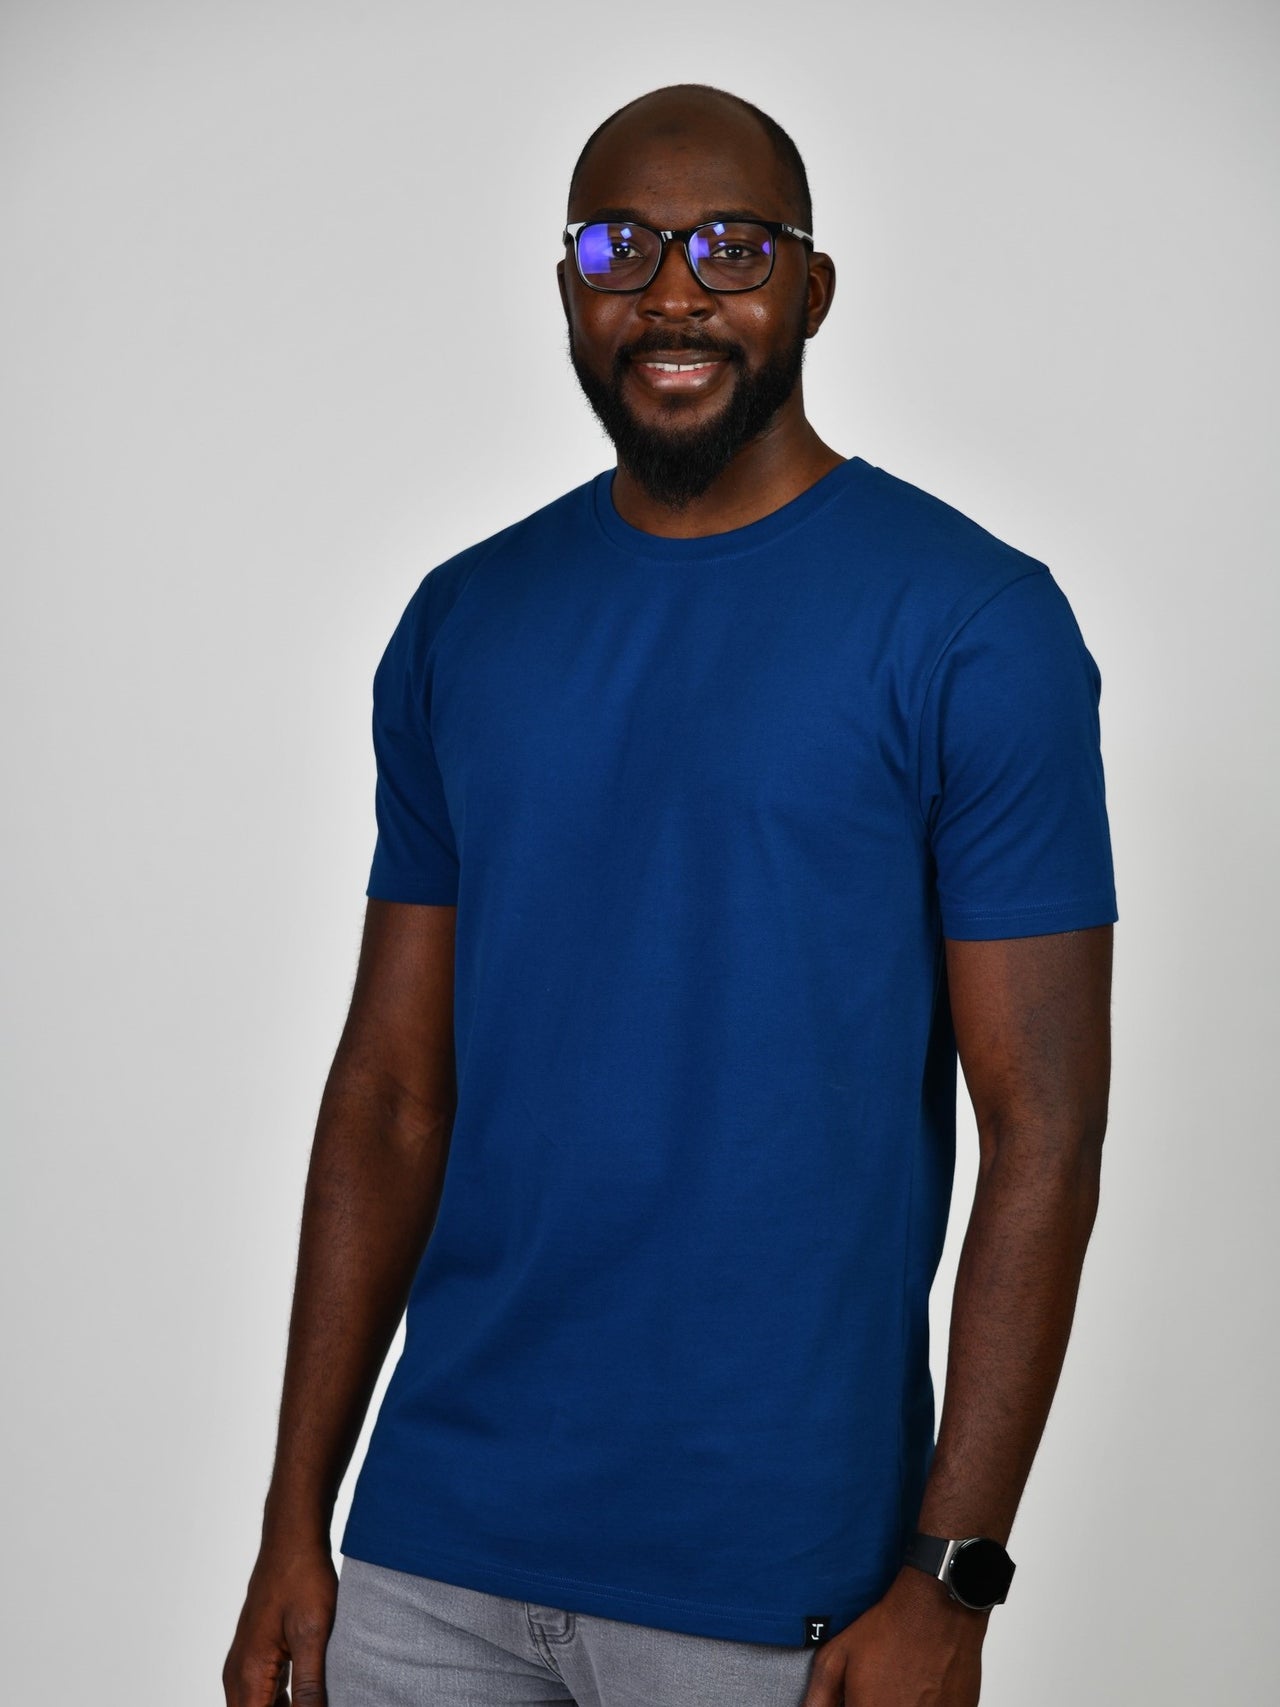 A tall and slim guy smiling in the studio and wearing a navy blue L tall slim t-shirt.